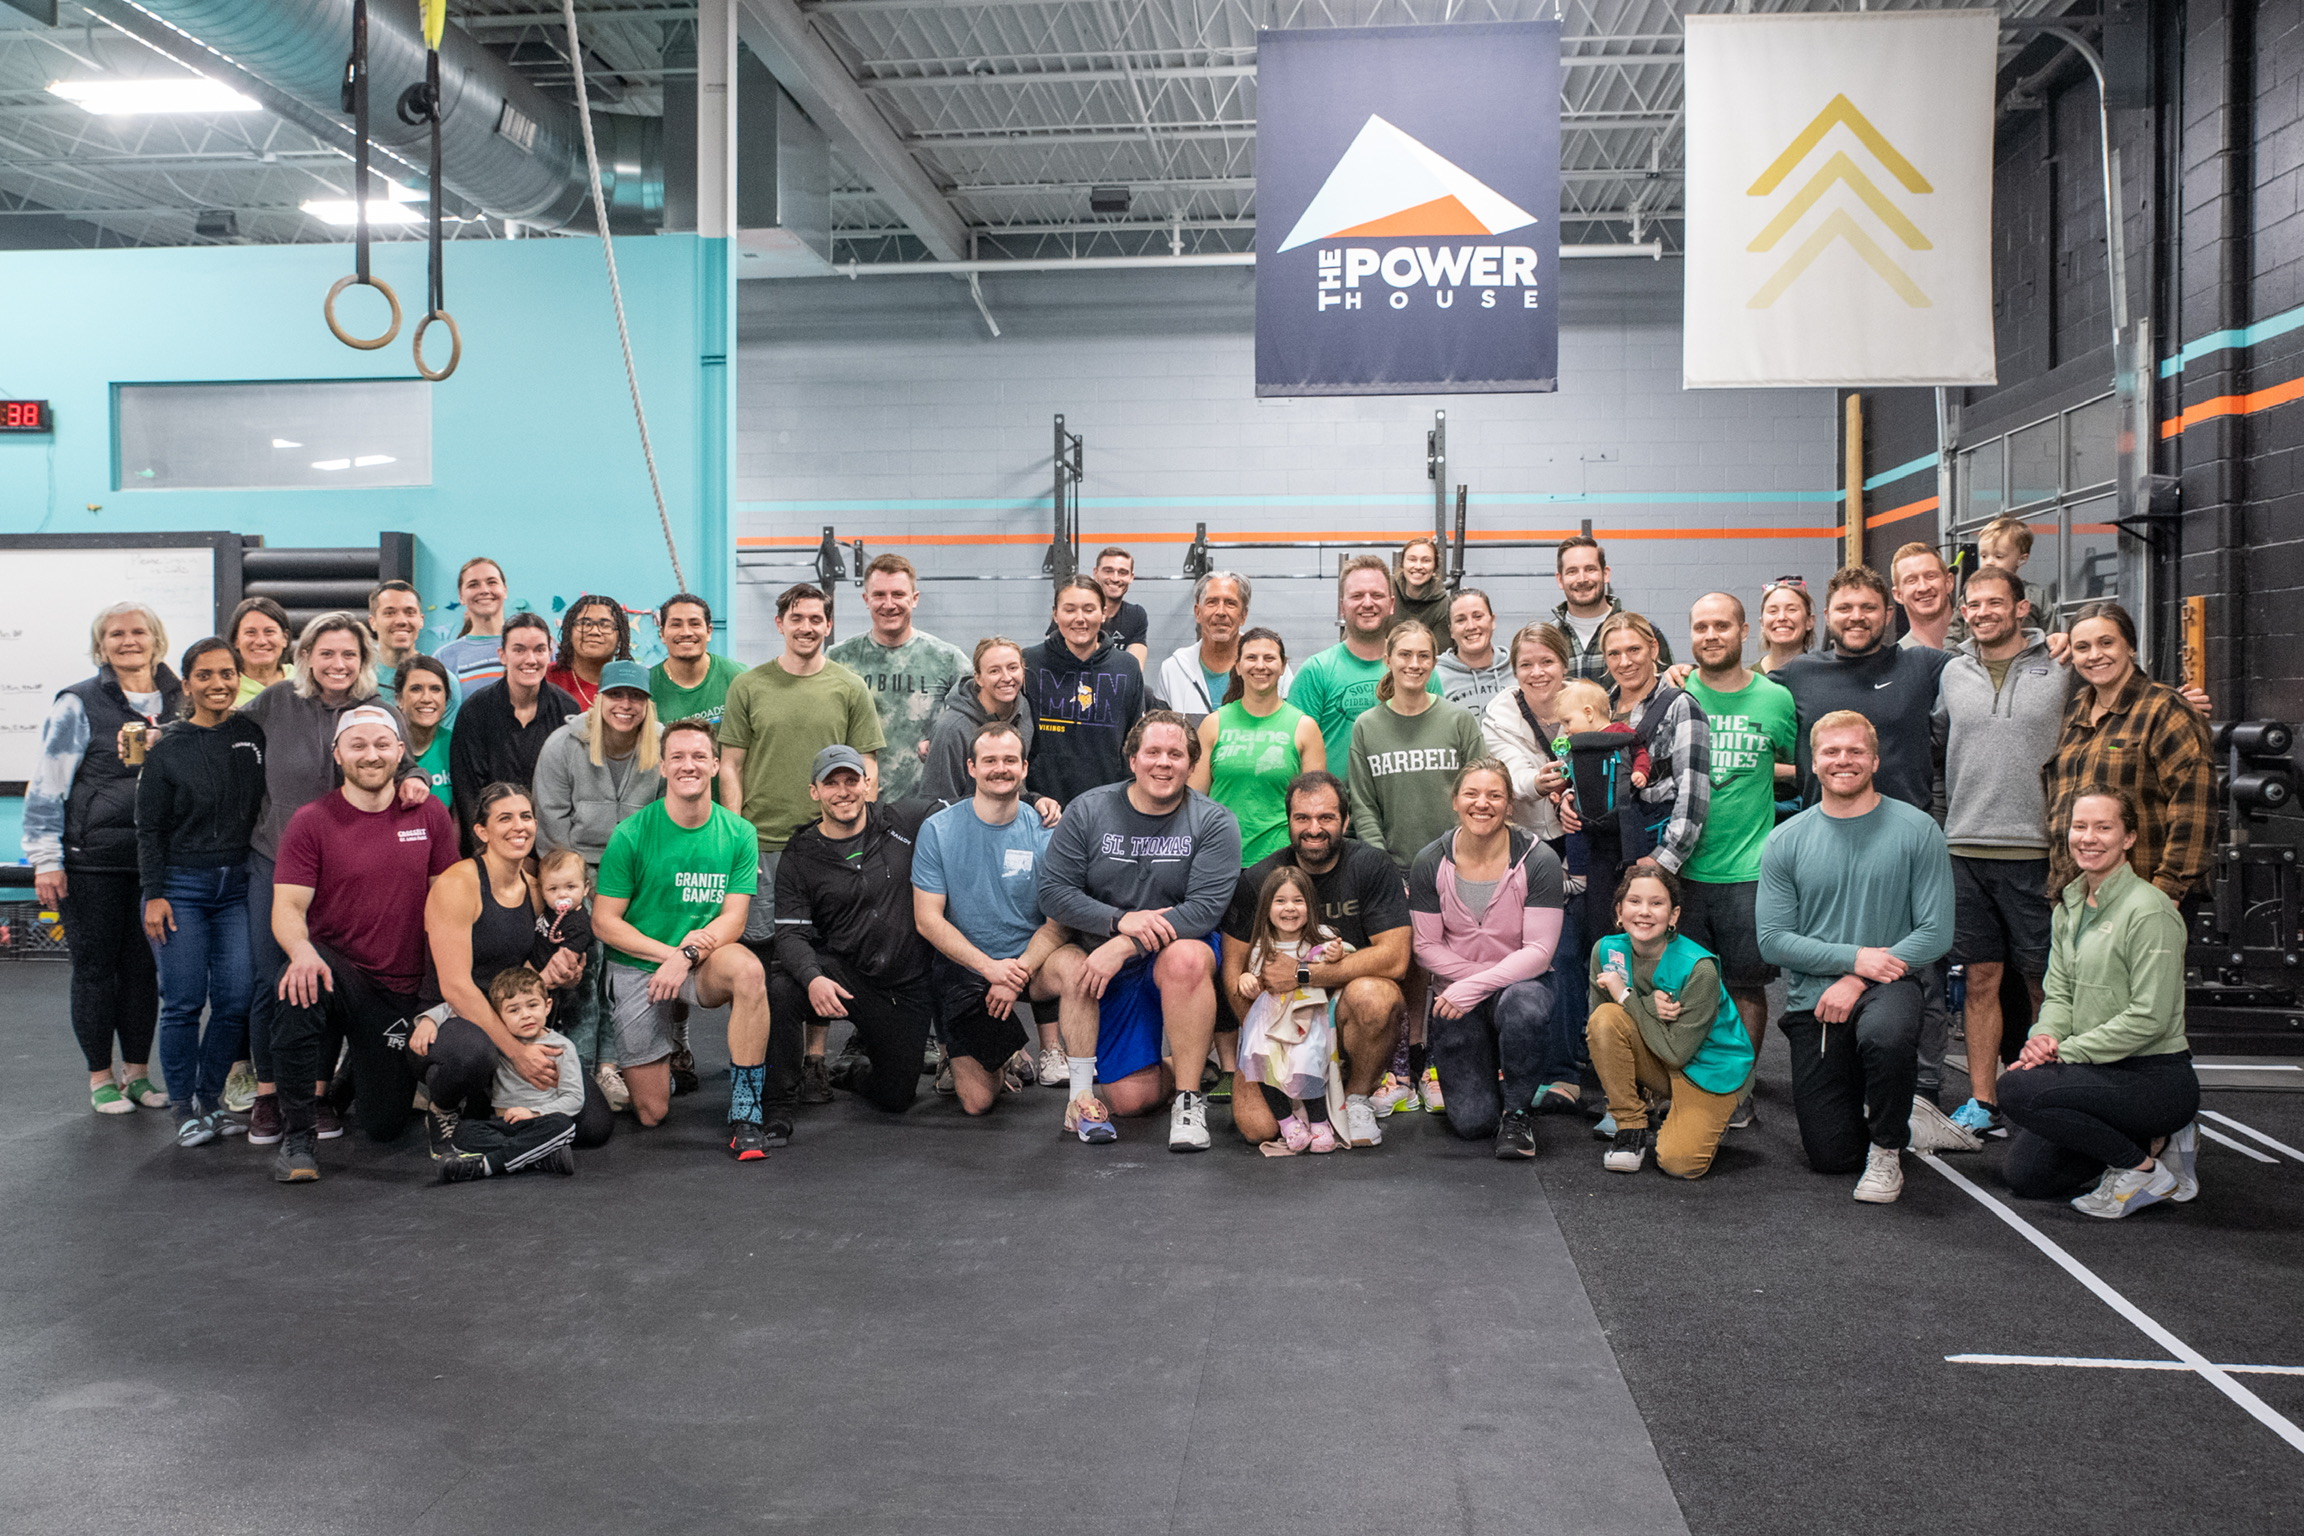 crossfit community fitness gym in st louis park mn